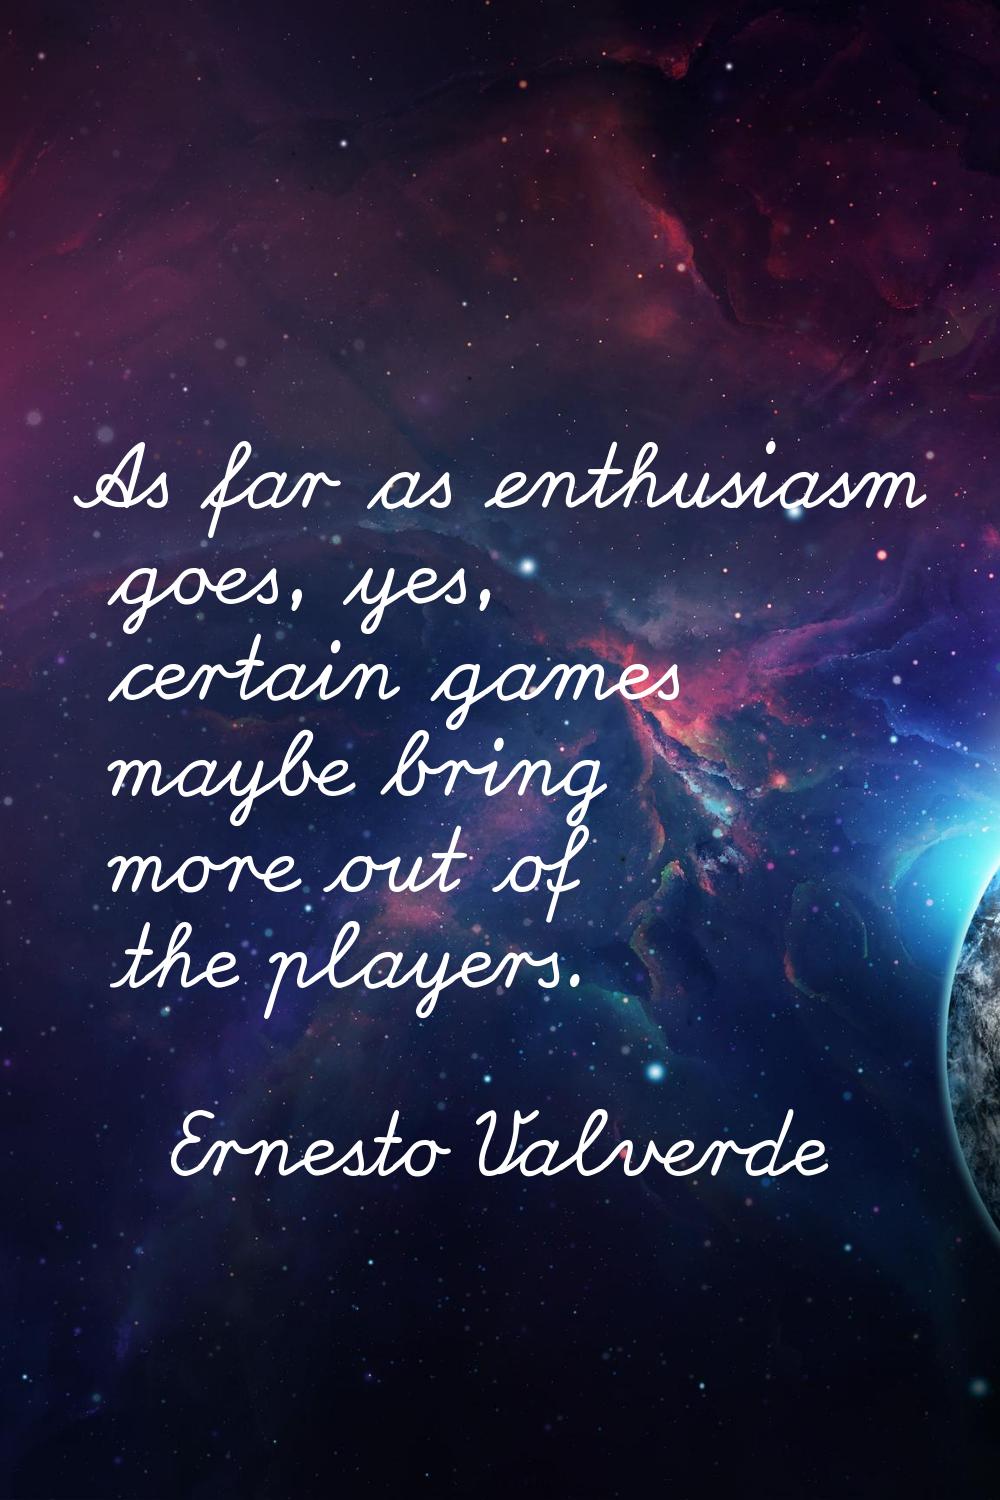 As far as enthusiasm goes, yes, certain games maybe bring more out of the players.